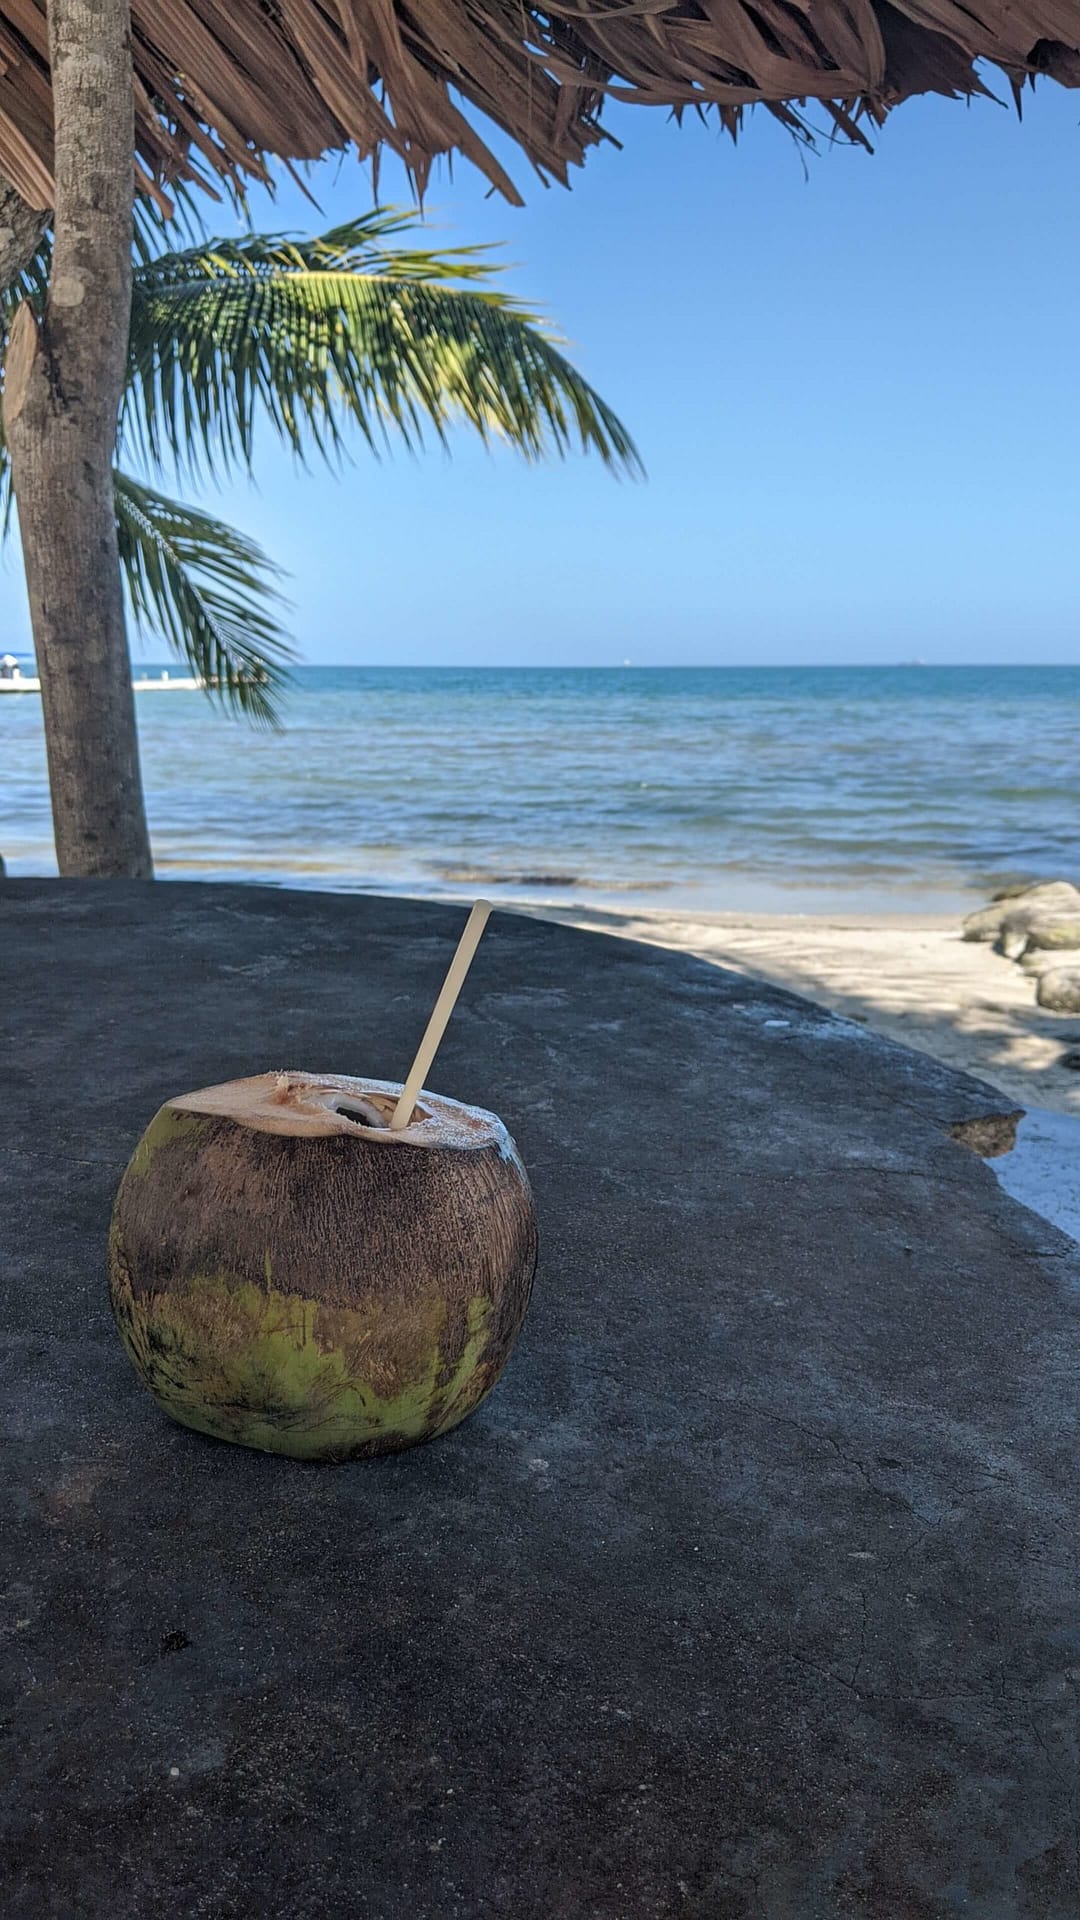 A coconut water in front of a beach scene